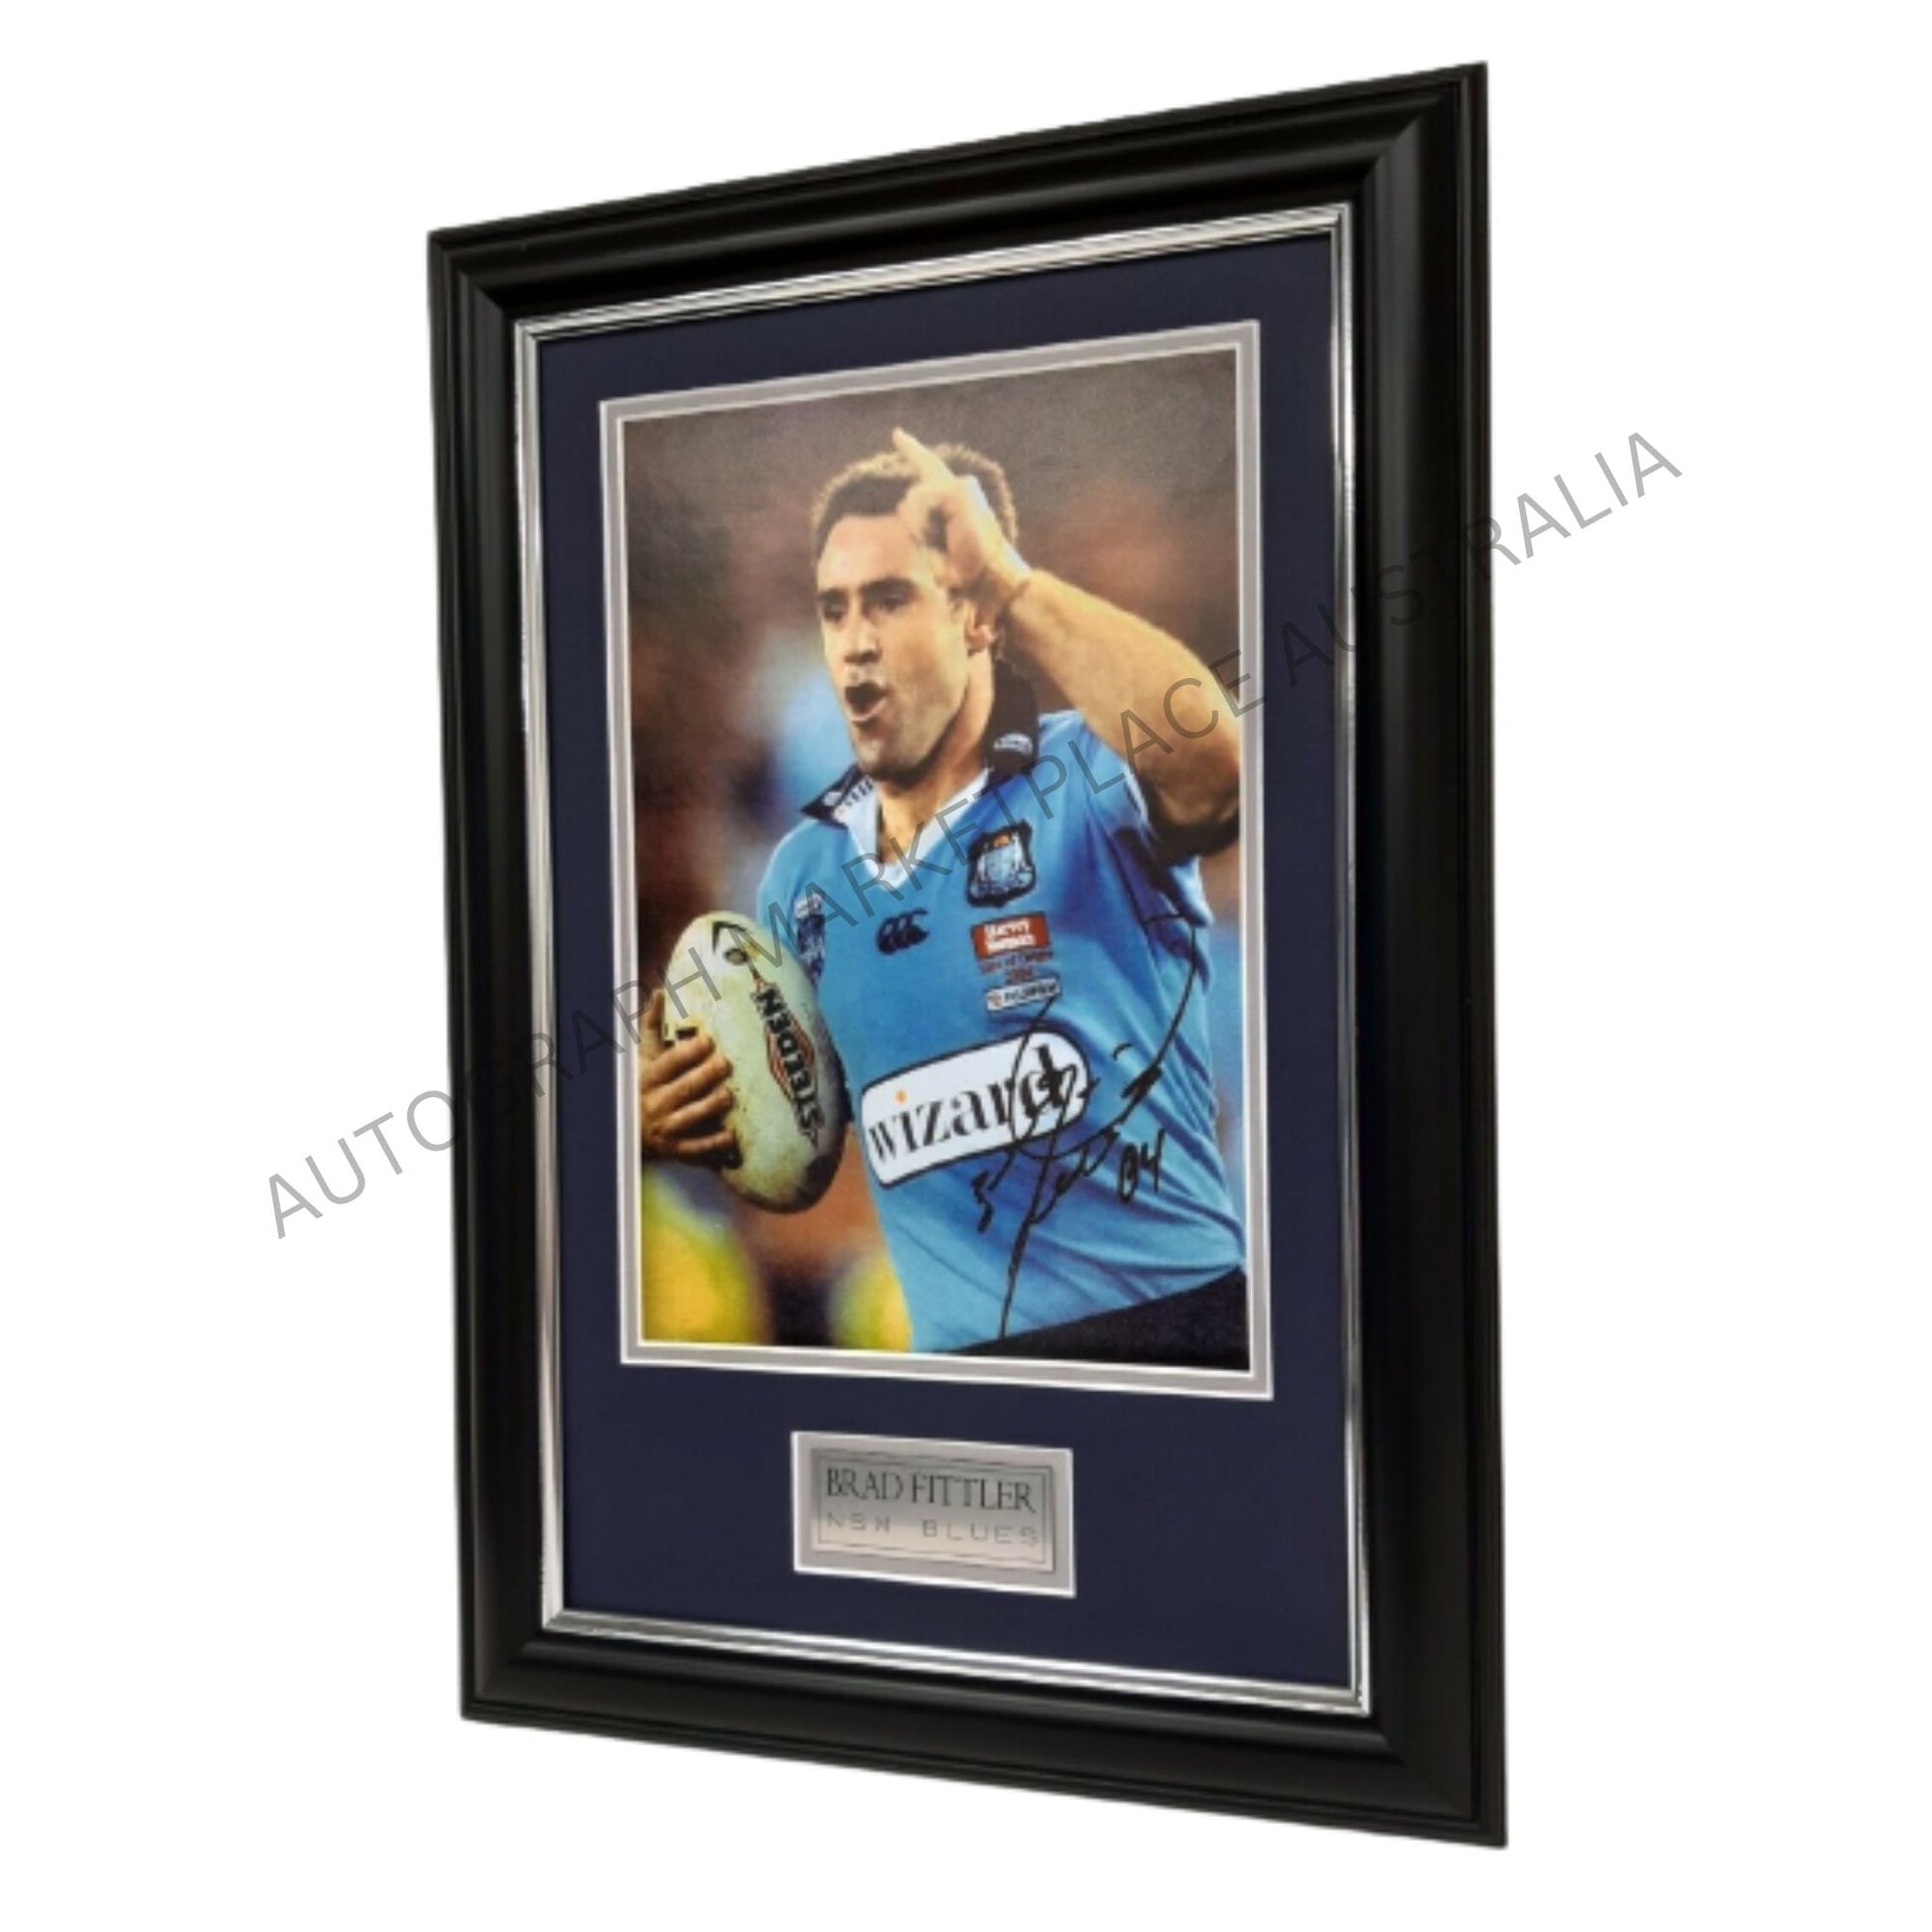 Brad Fittler NSW Blues Legend Signed Action Photo